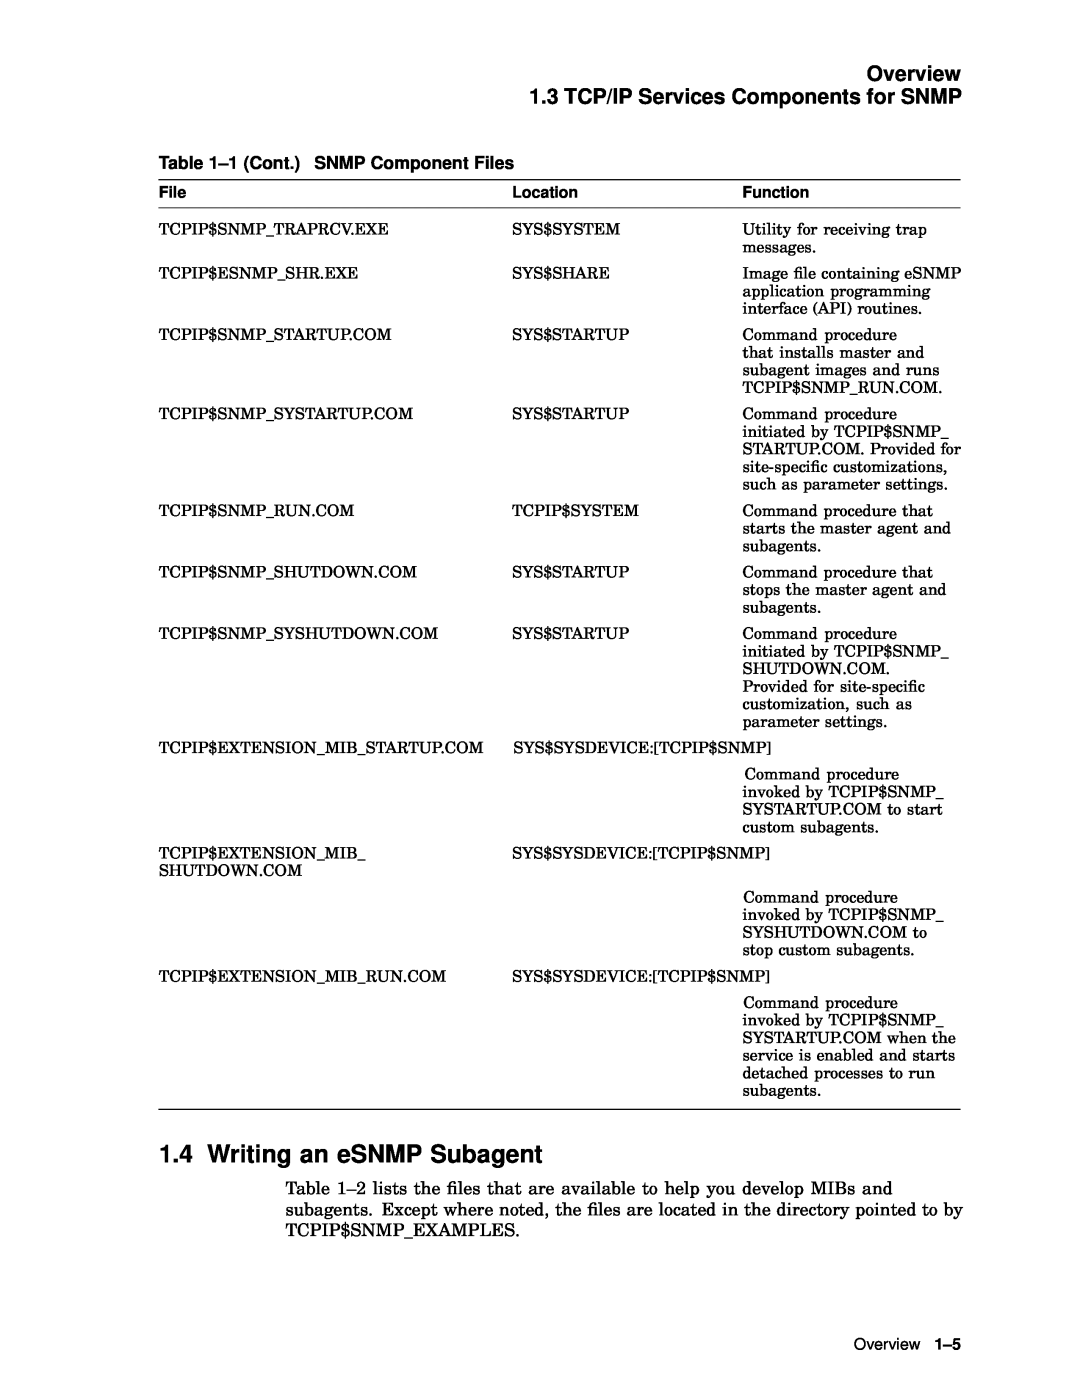 Compaq AAR04BCTE Writing an eSNMP Subagent, Overview 1.3 TCP/IP Services Components for SNMP, 1 Cont. SNMP Component Files 